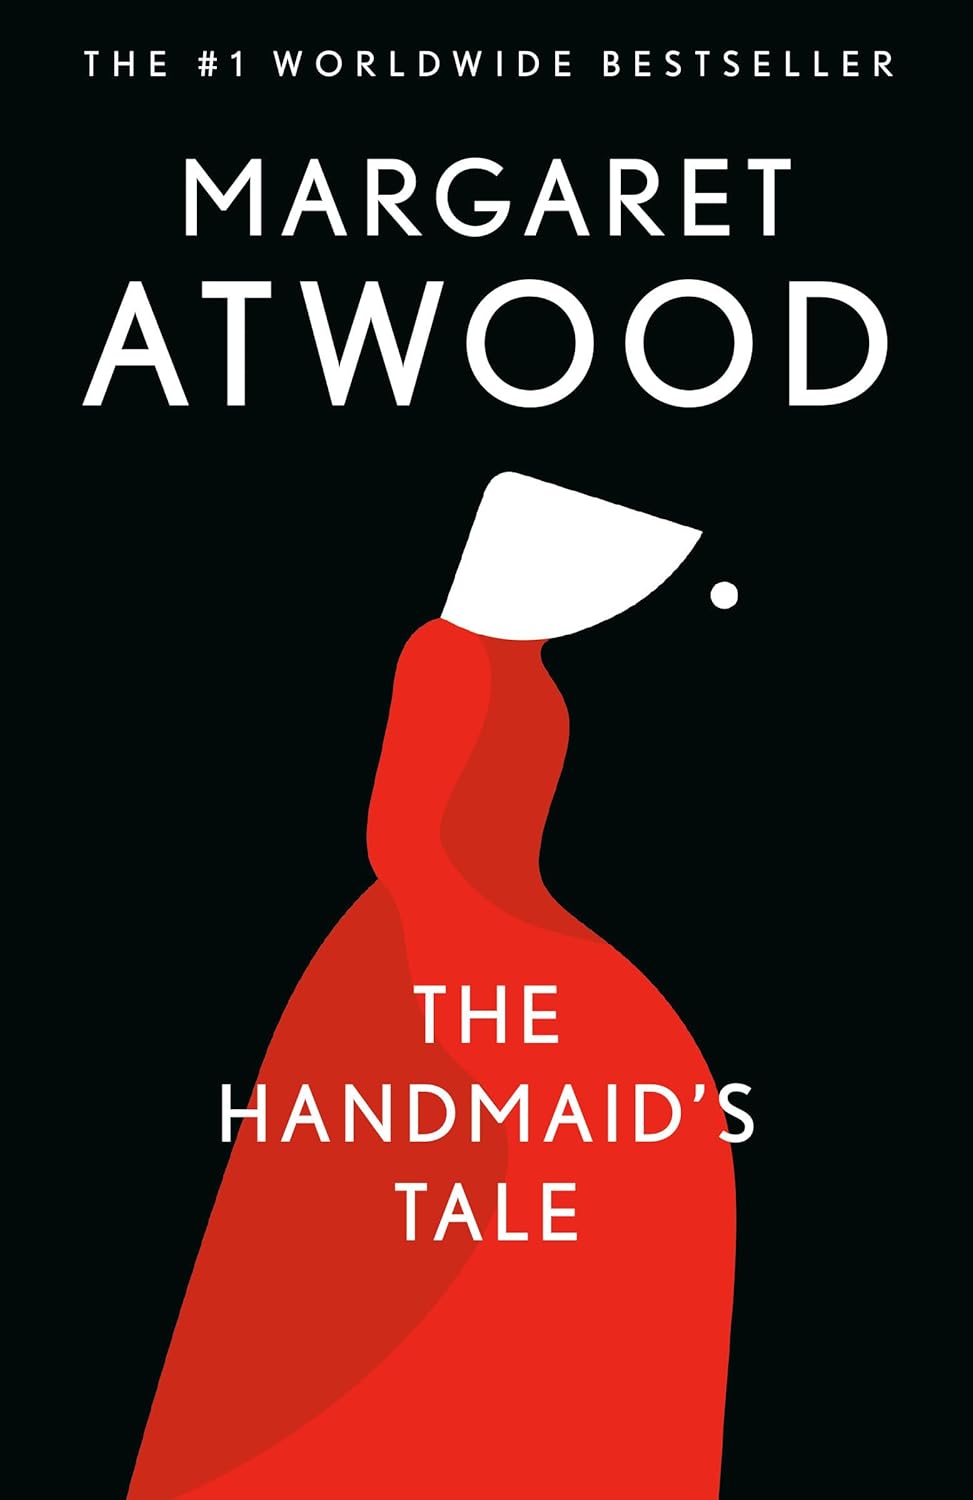 The Handmaid's Tale by Margaret Atwood (1985)